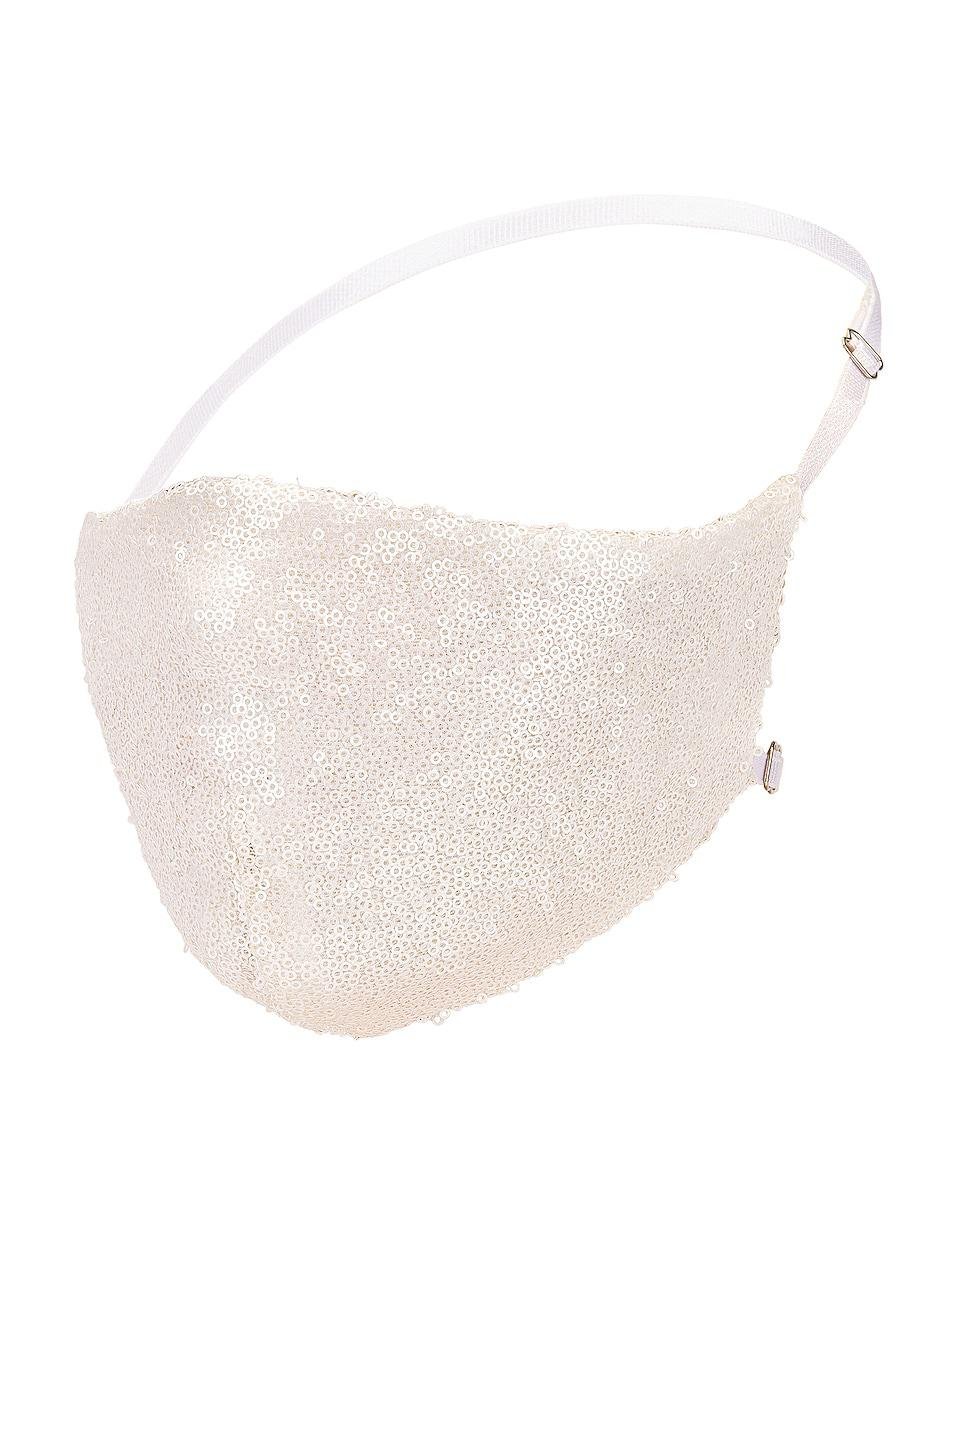 Katie May Disco Ball Face Mask in Ivory by KATIE MAY